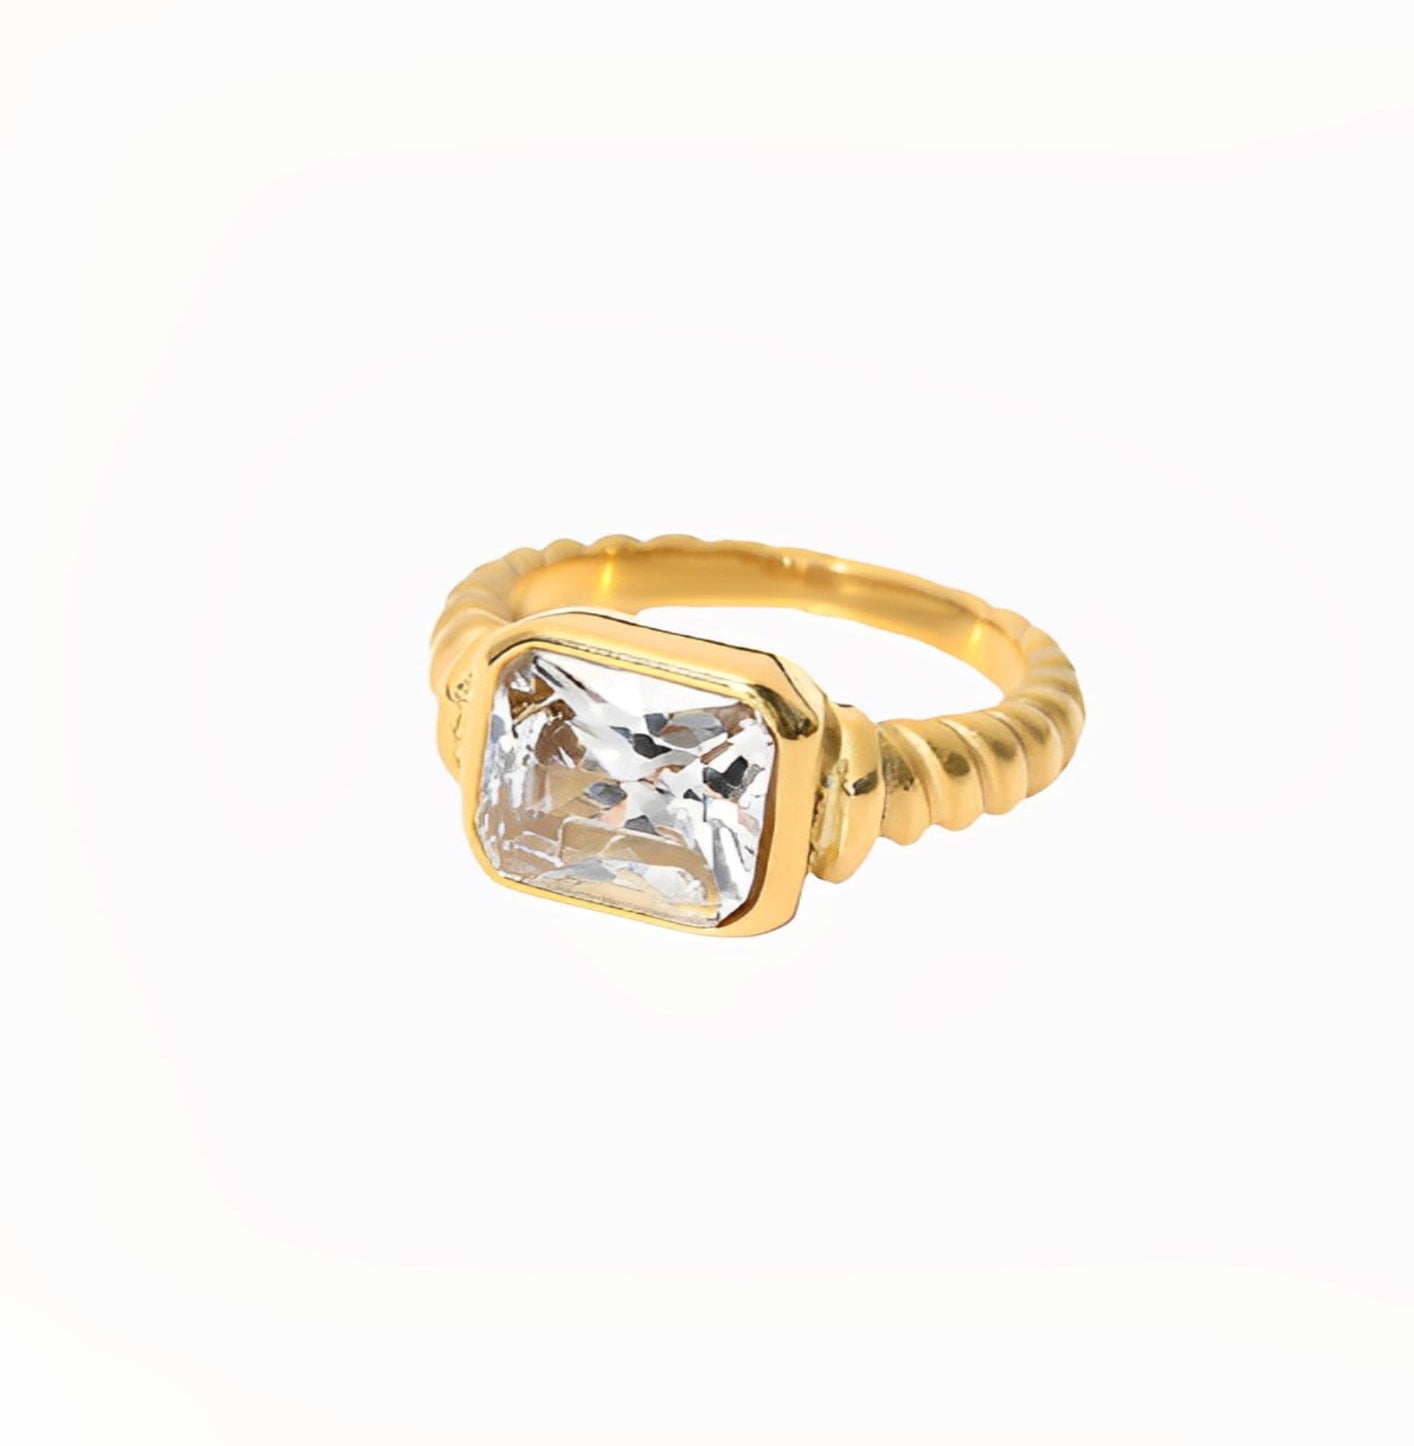 SQUARE DIAMOND RING ring Yubama Jewelry Online Store - The Elegant Designs of Gold and Silver ! 6 